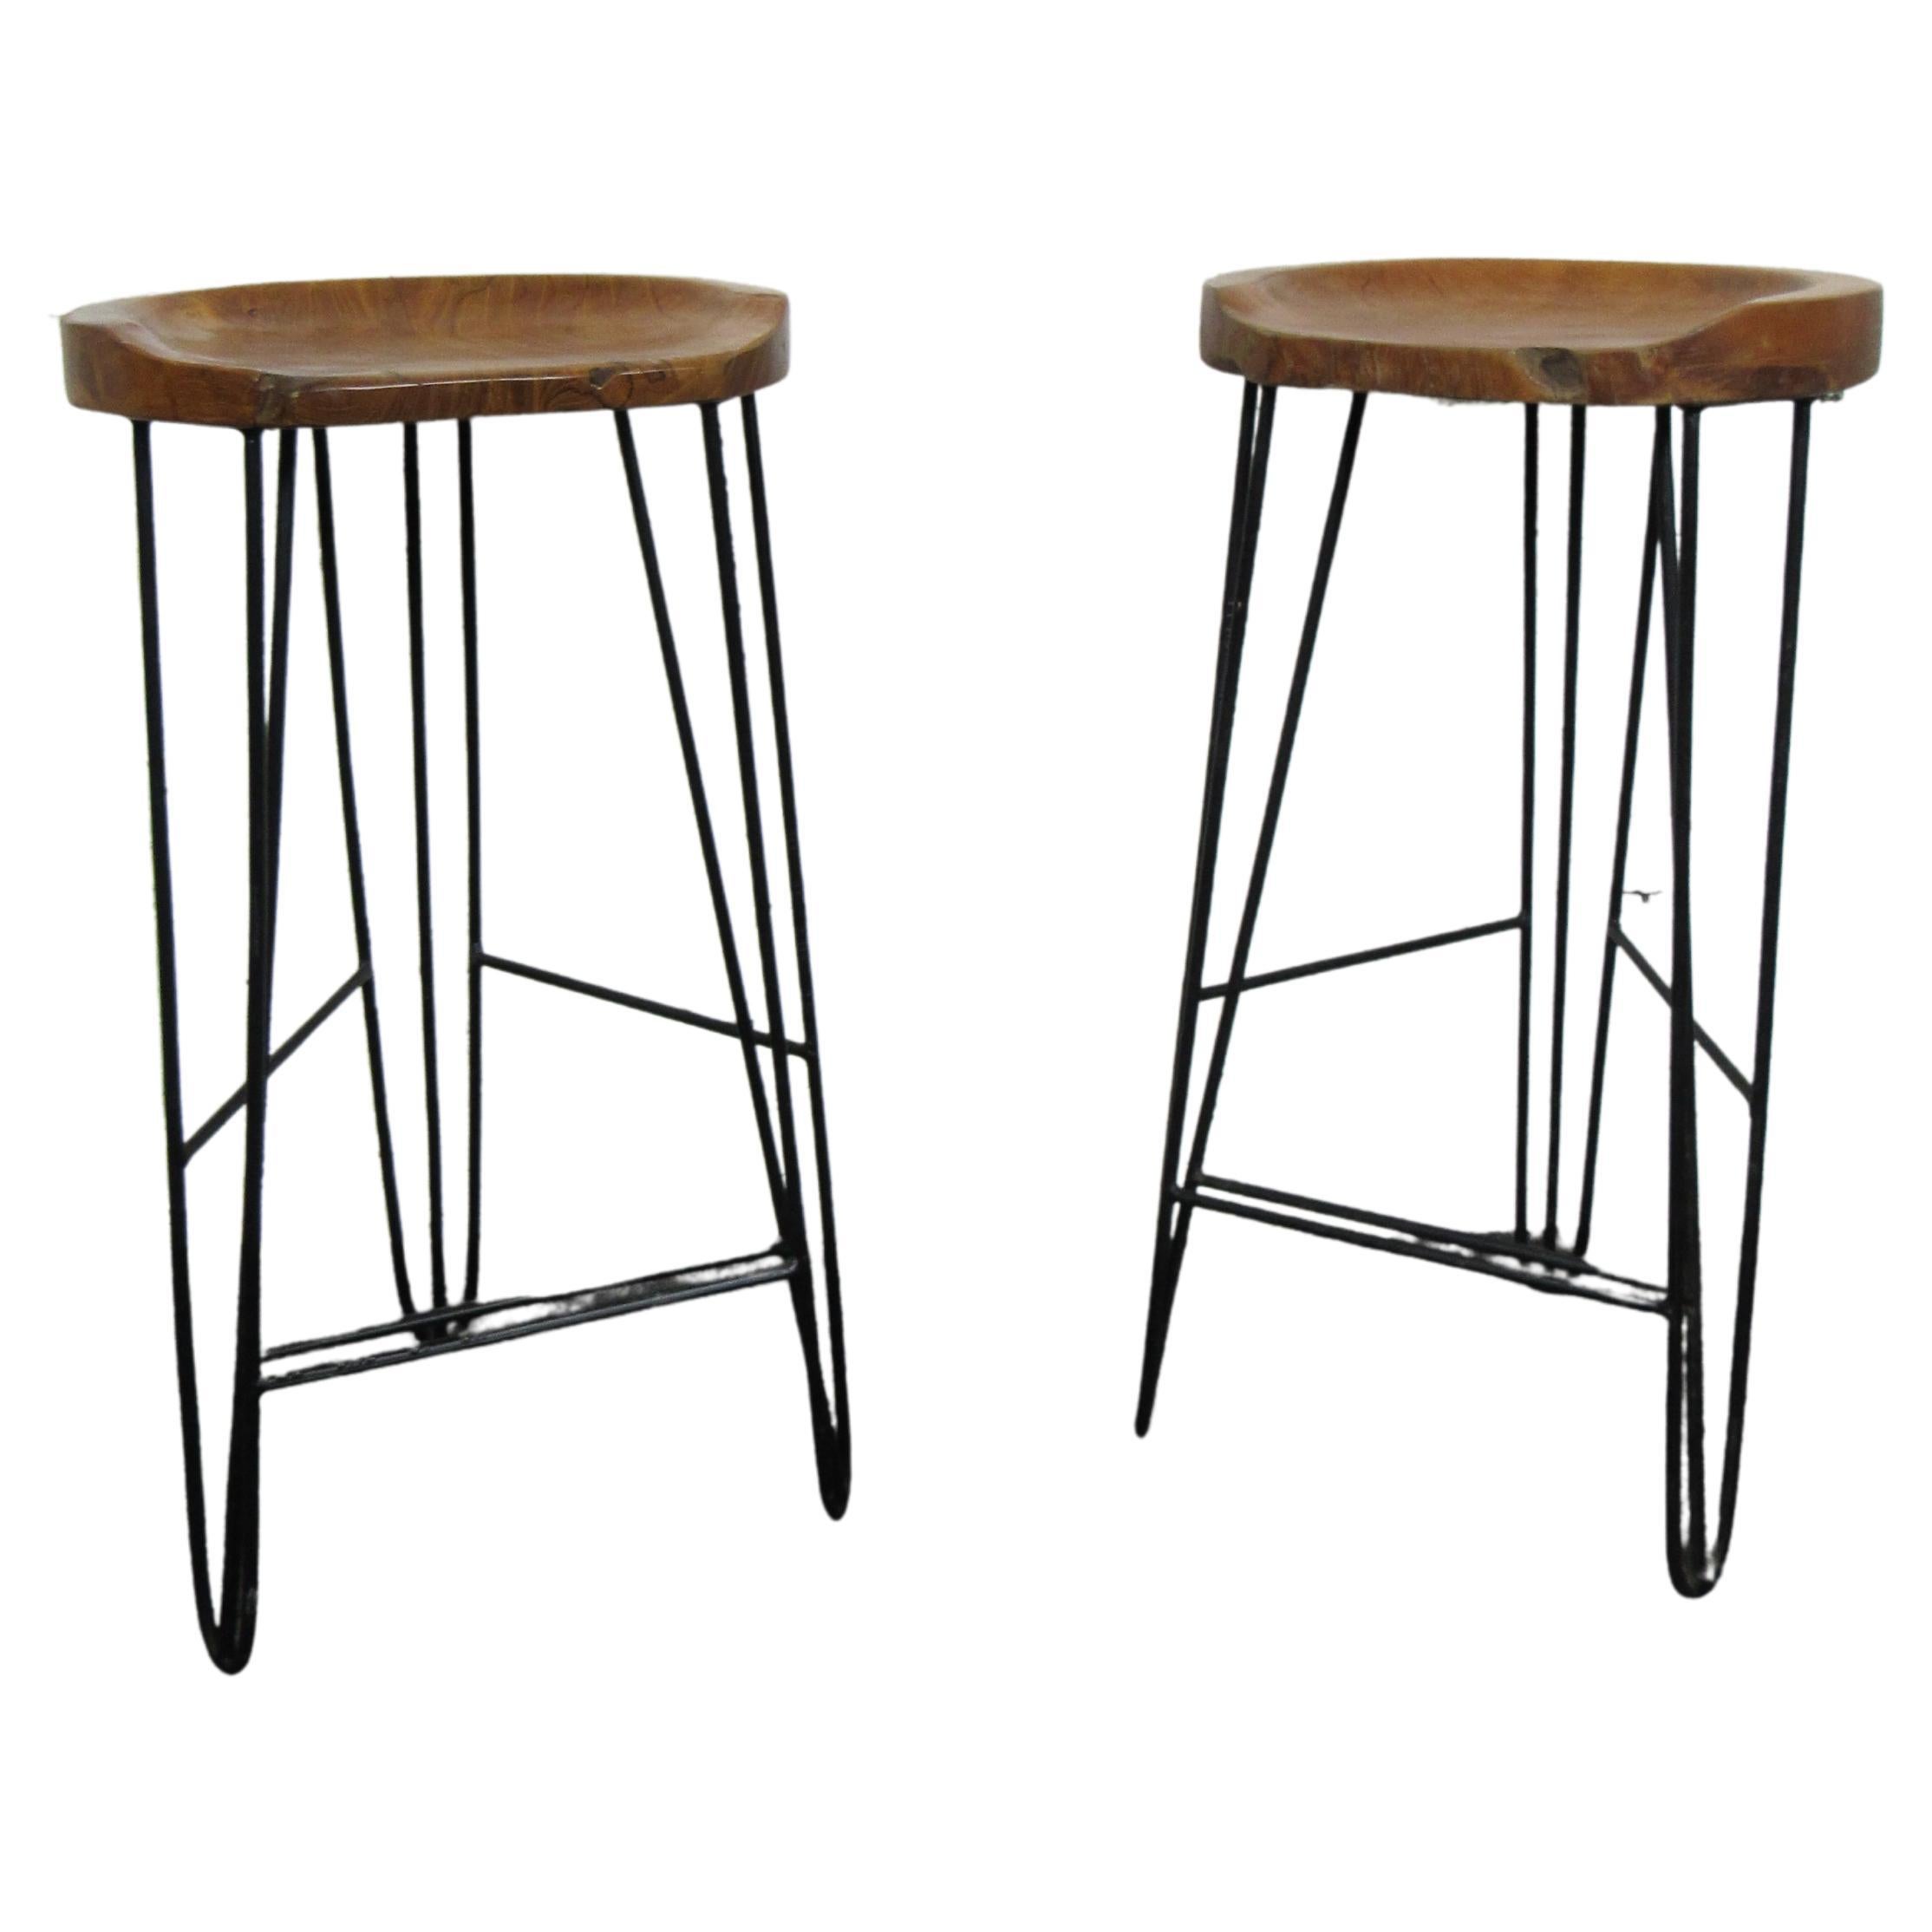 Vintage Bar Stools in Wood and Iron